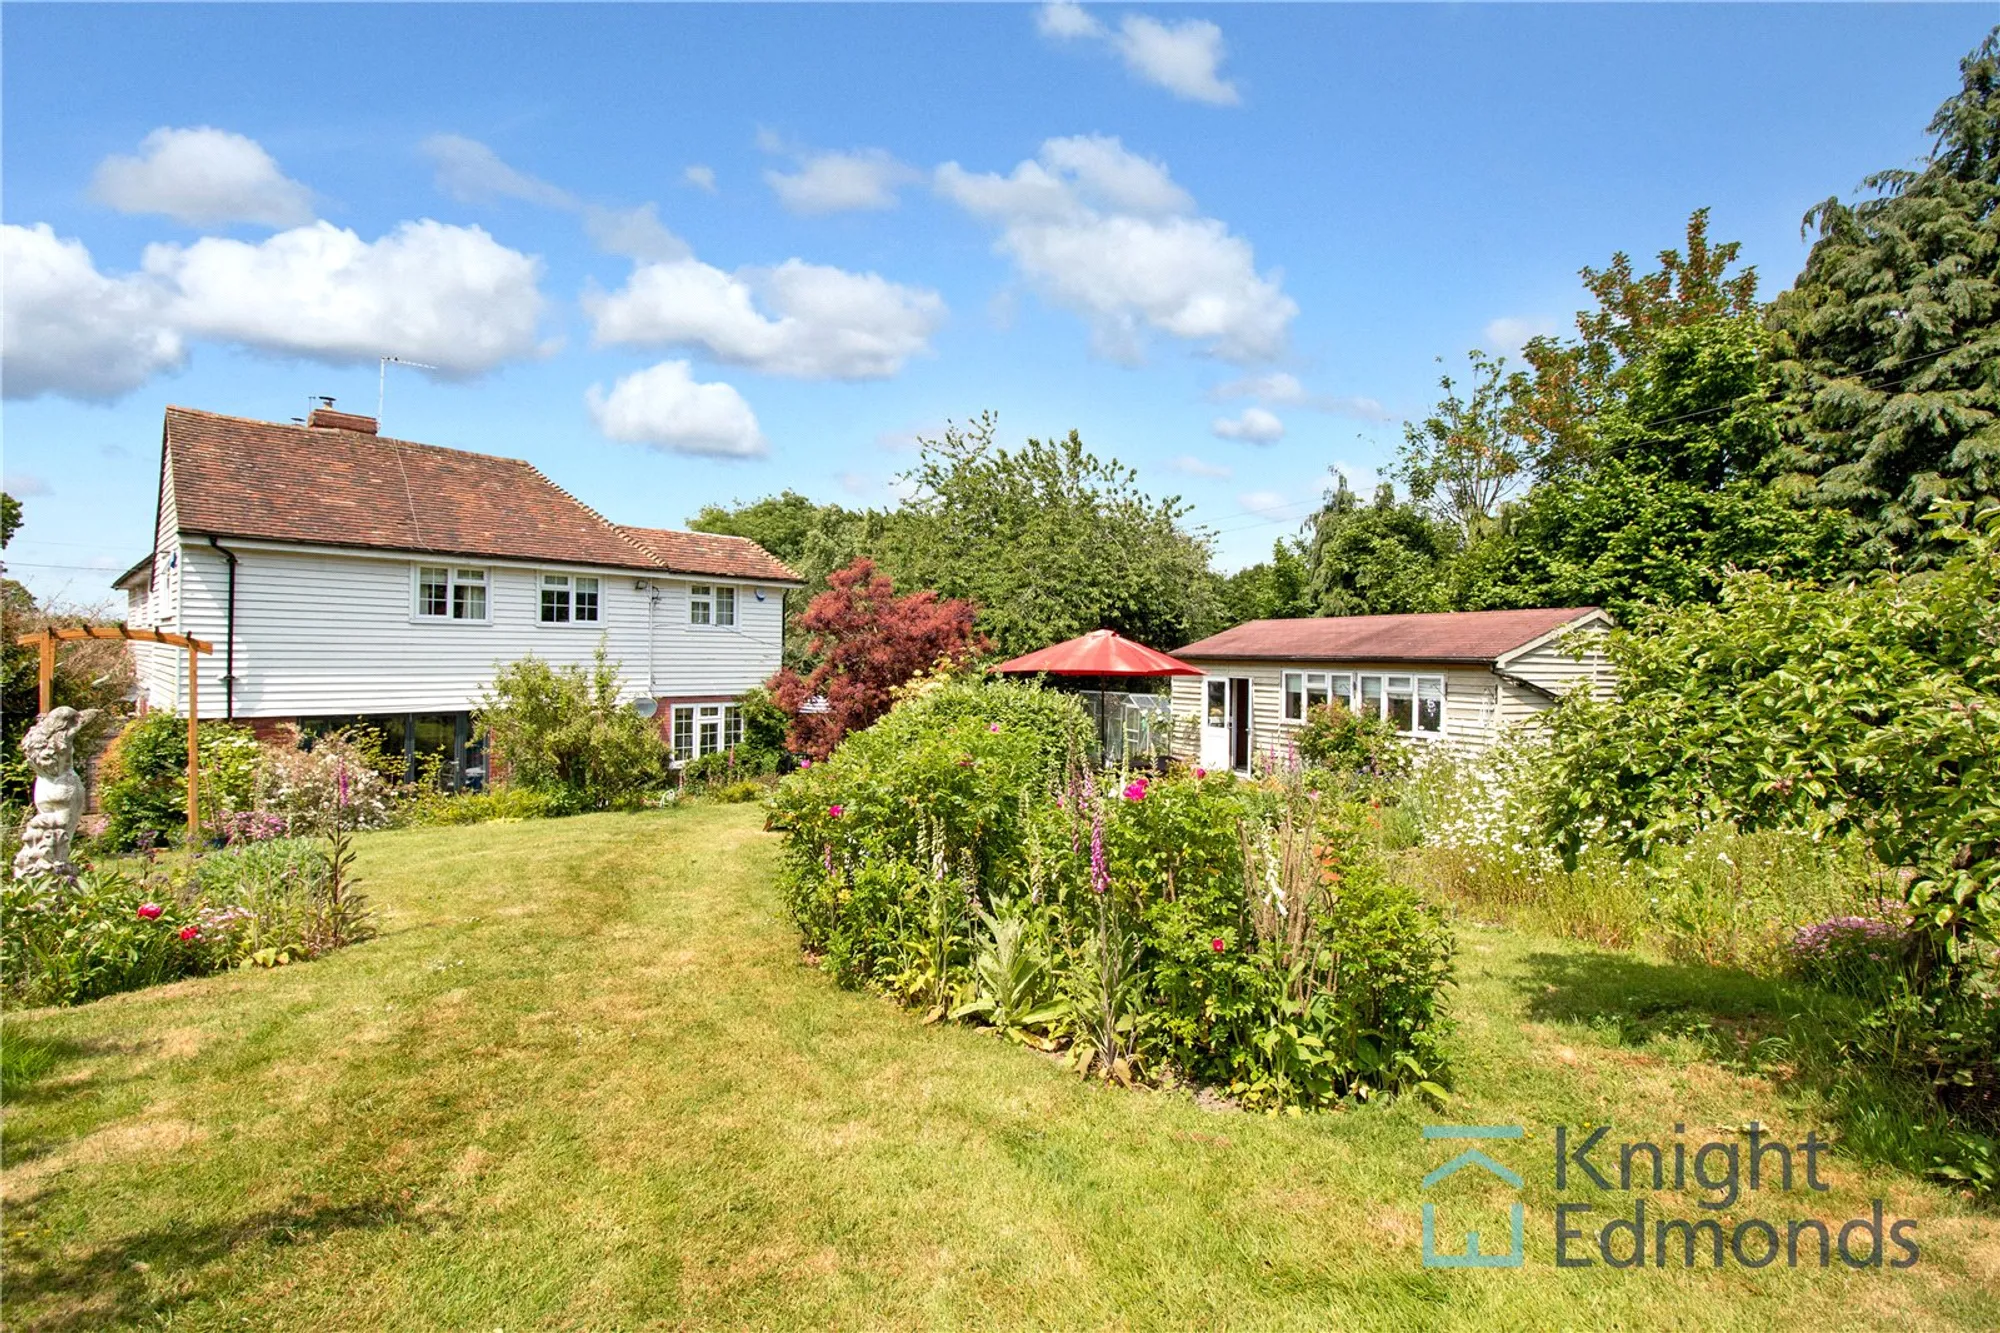 3 bed end of terrace house for sale in Hilltop, Maidstone 1